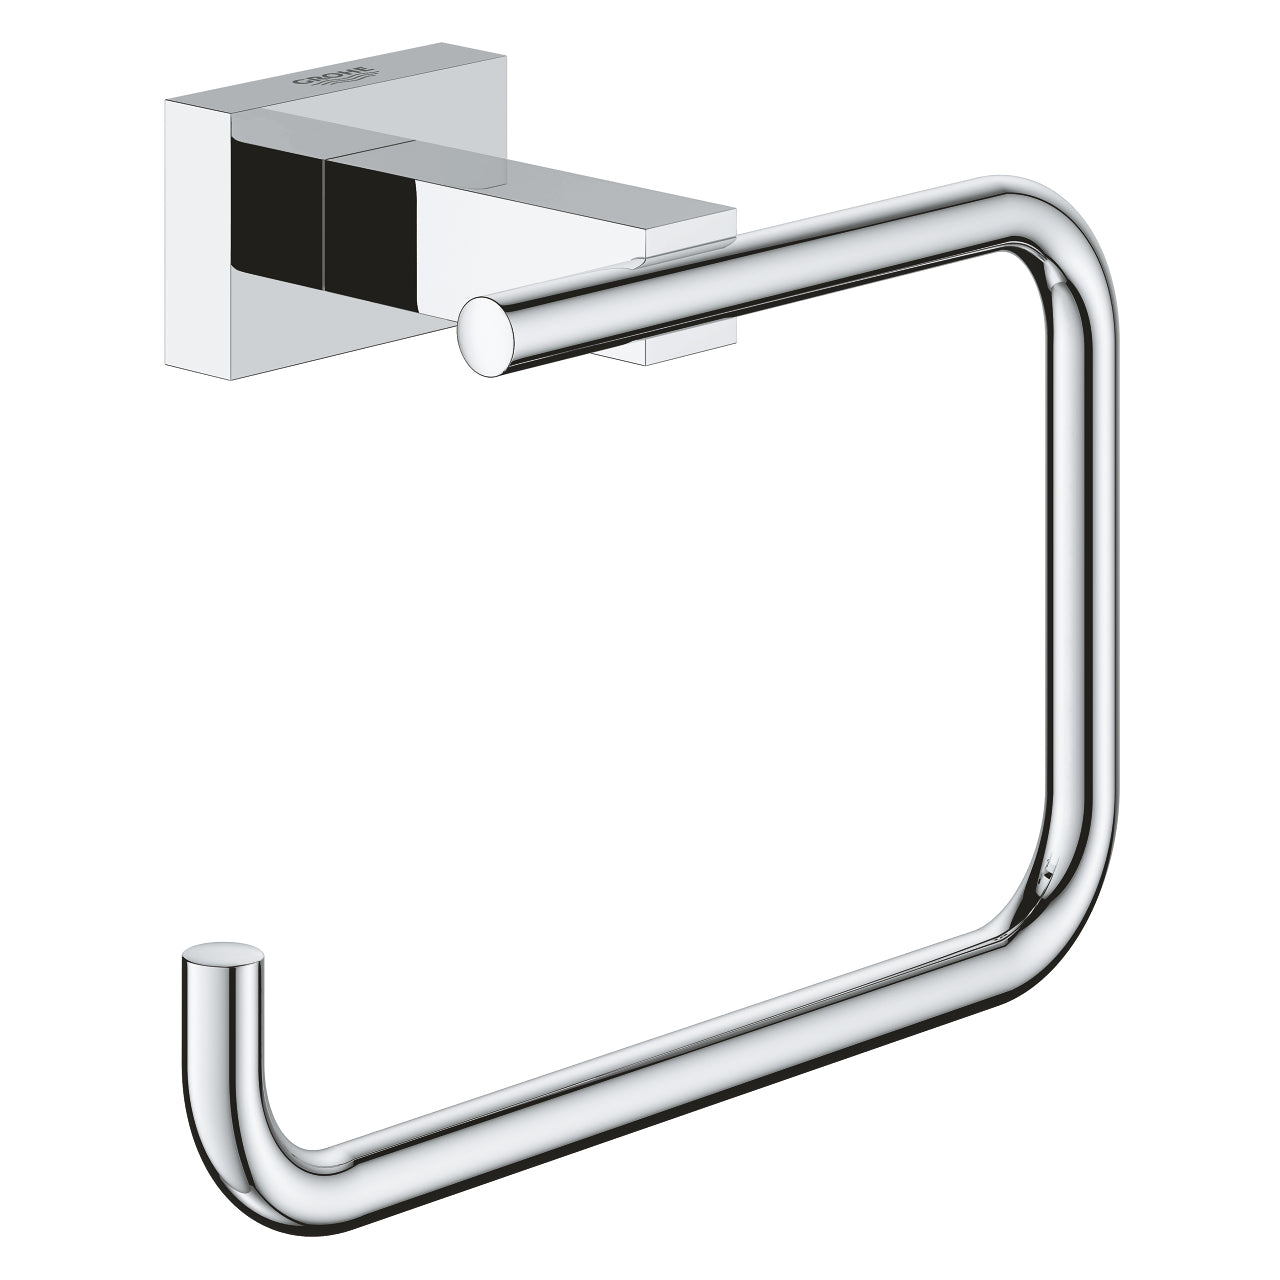 Móc giấy vệ sinh Grohe Essentials Cube 40507001